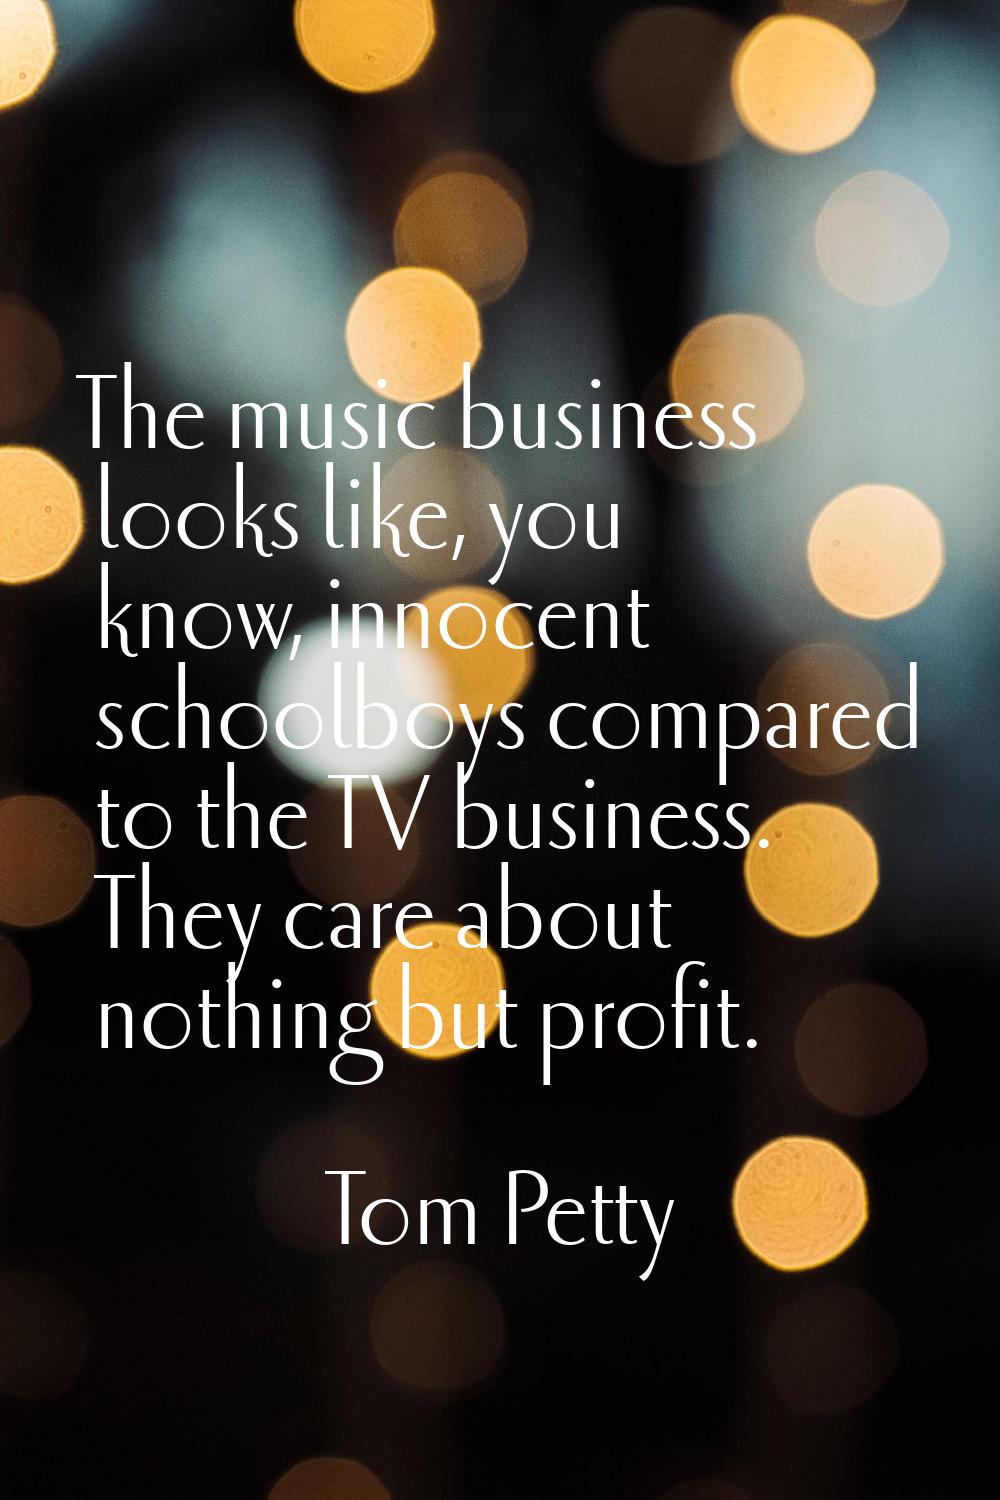 The music business looks like, you know, innocent schoolboys compared to the TV business. They care